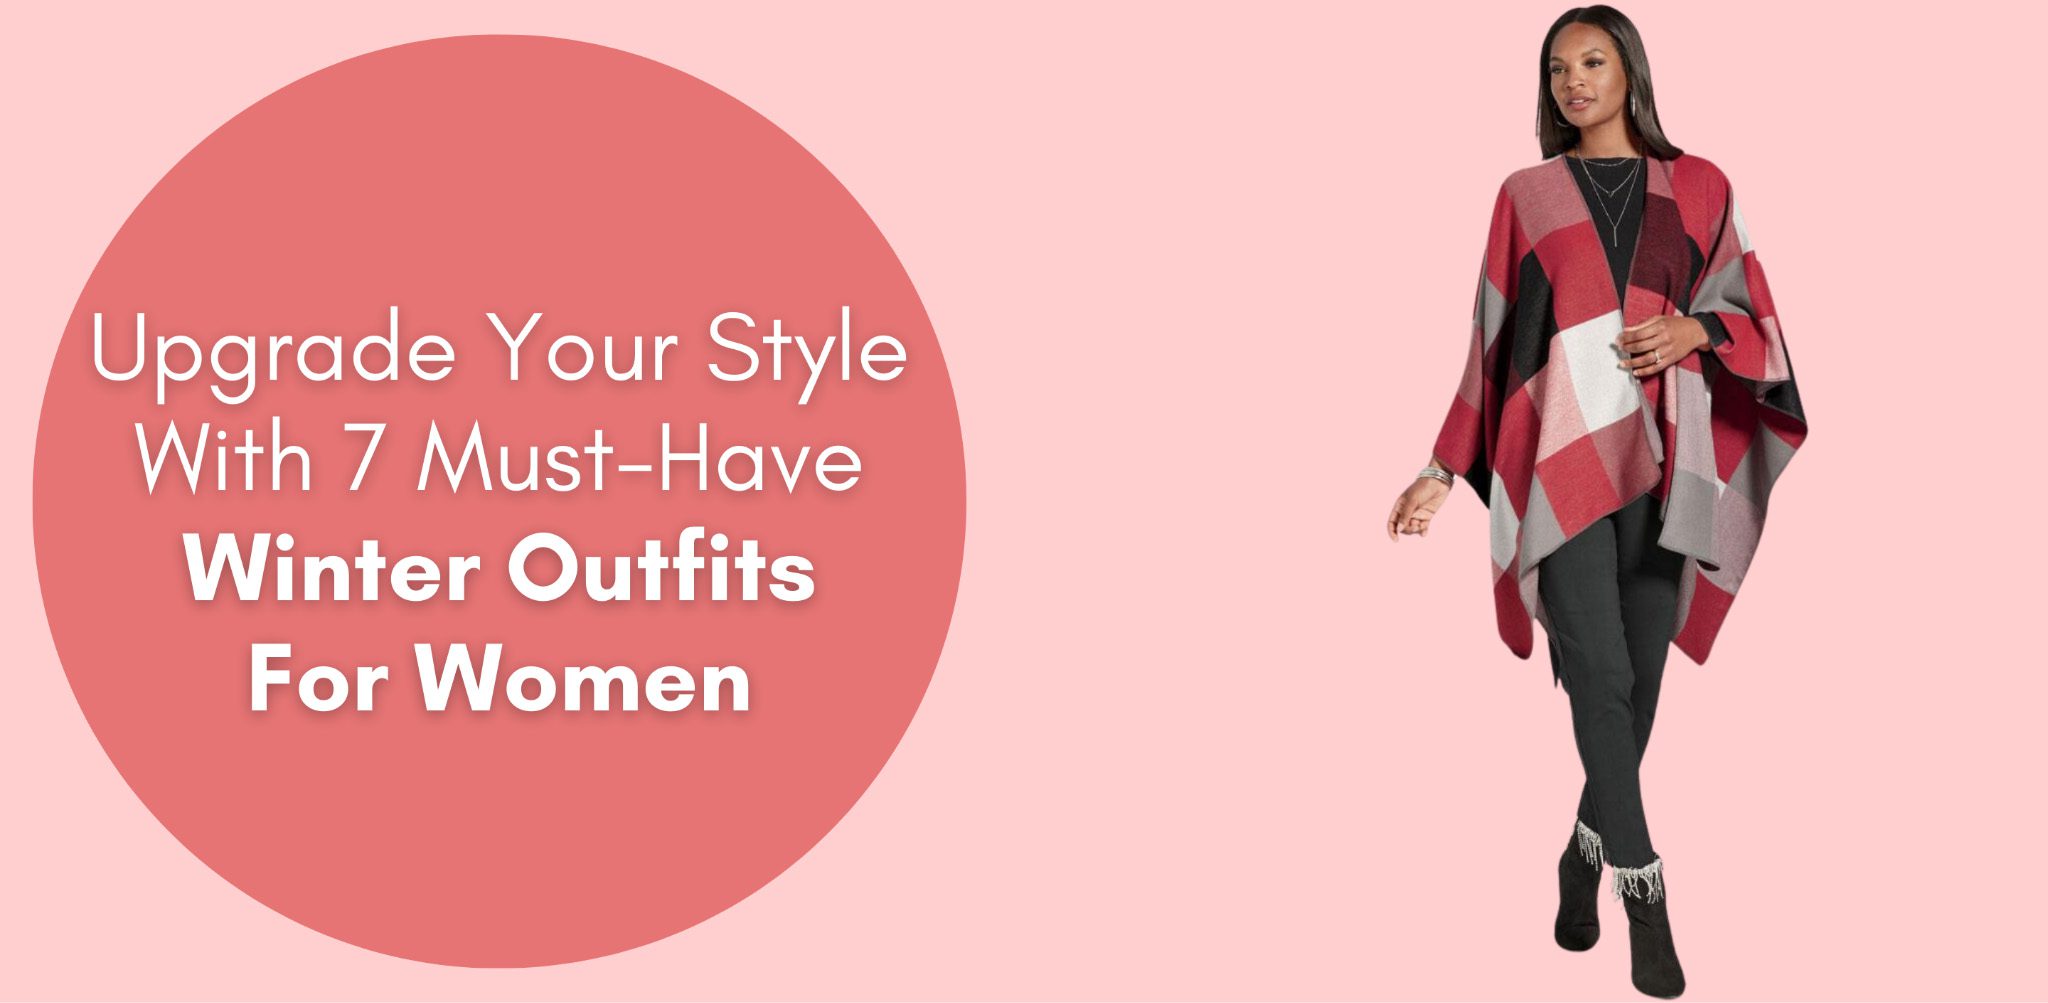 Upgrade Your Style With 7 Must-Have Winter Outfits For Women